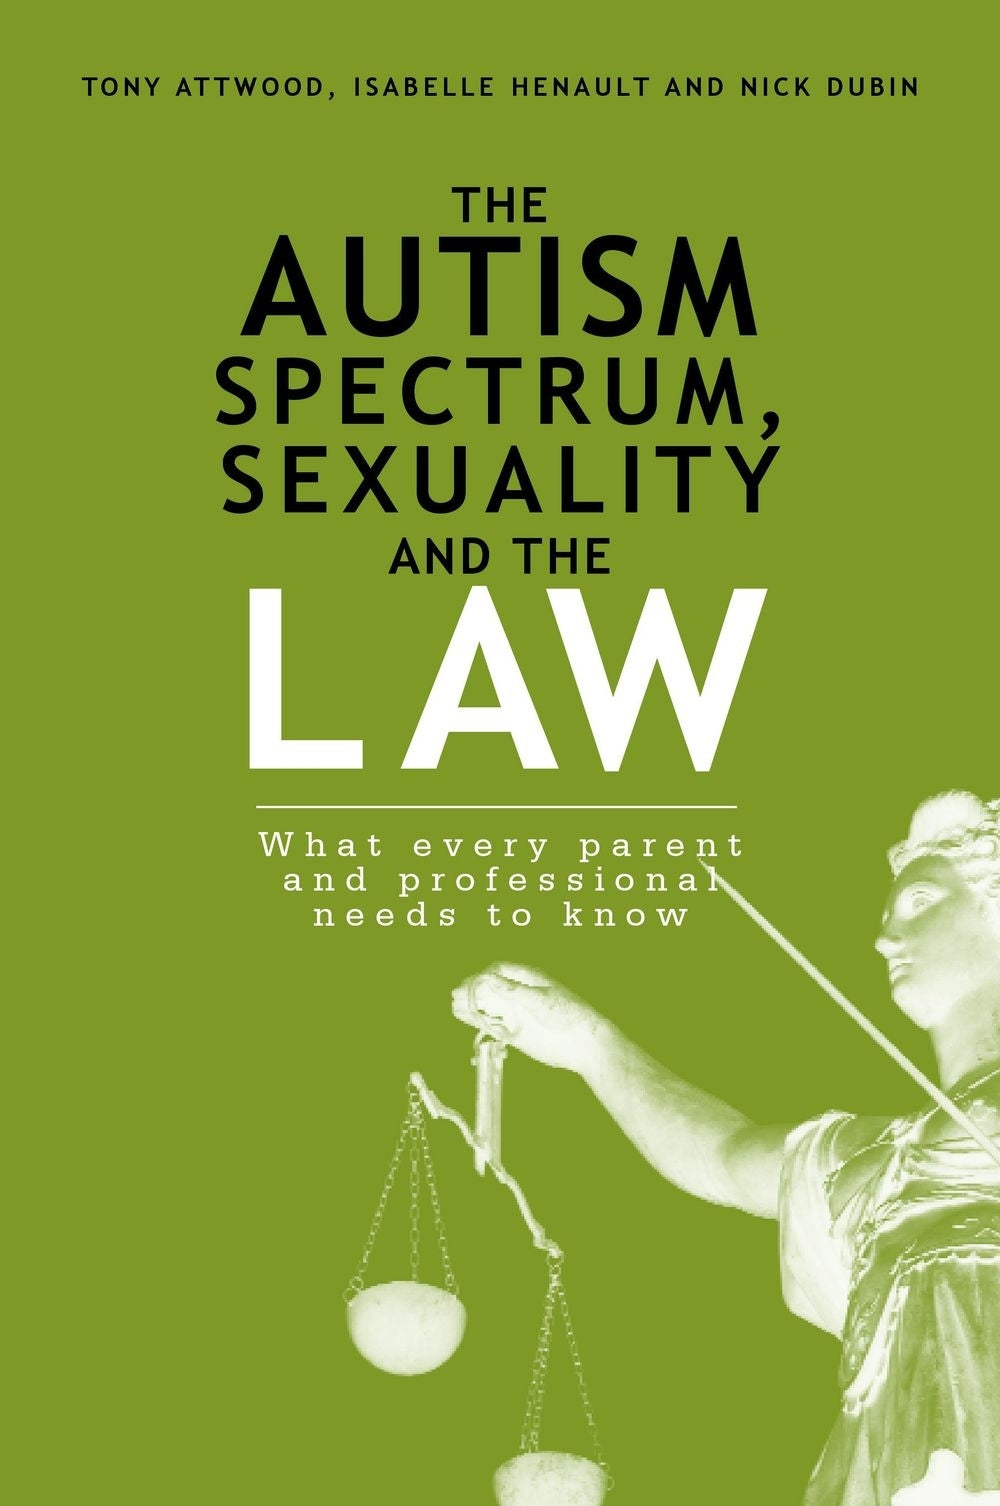 The Autism Spectrum, Sexuality and the Law by Nick Dubin, Isabelle Henault, Dr Anthony Attwood